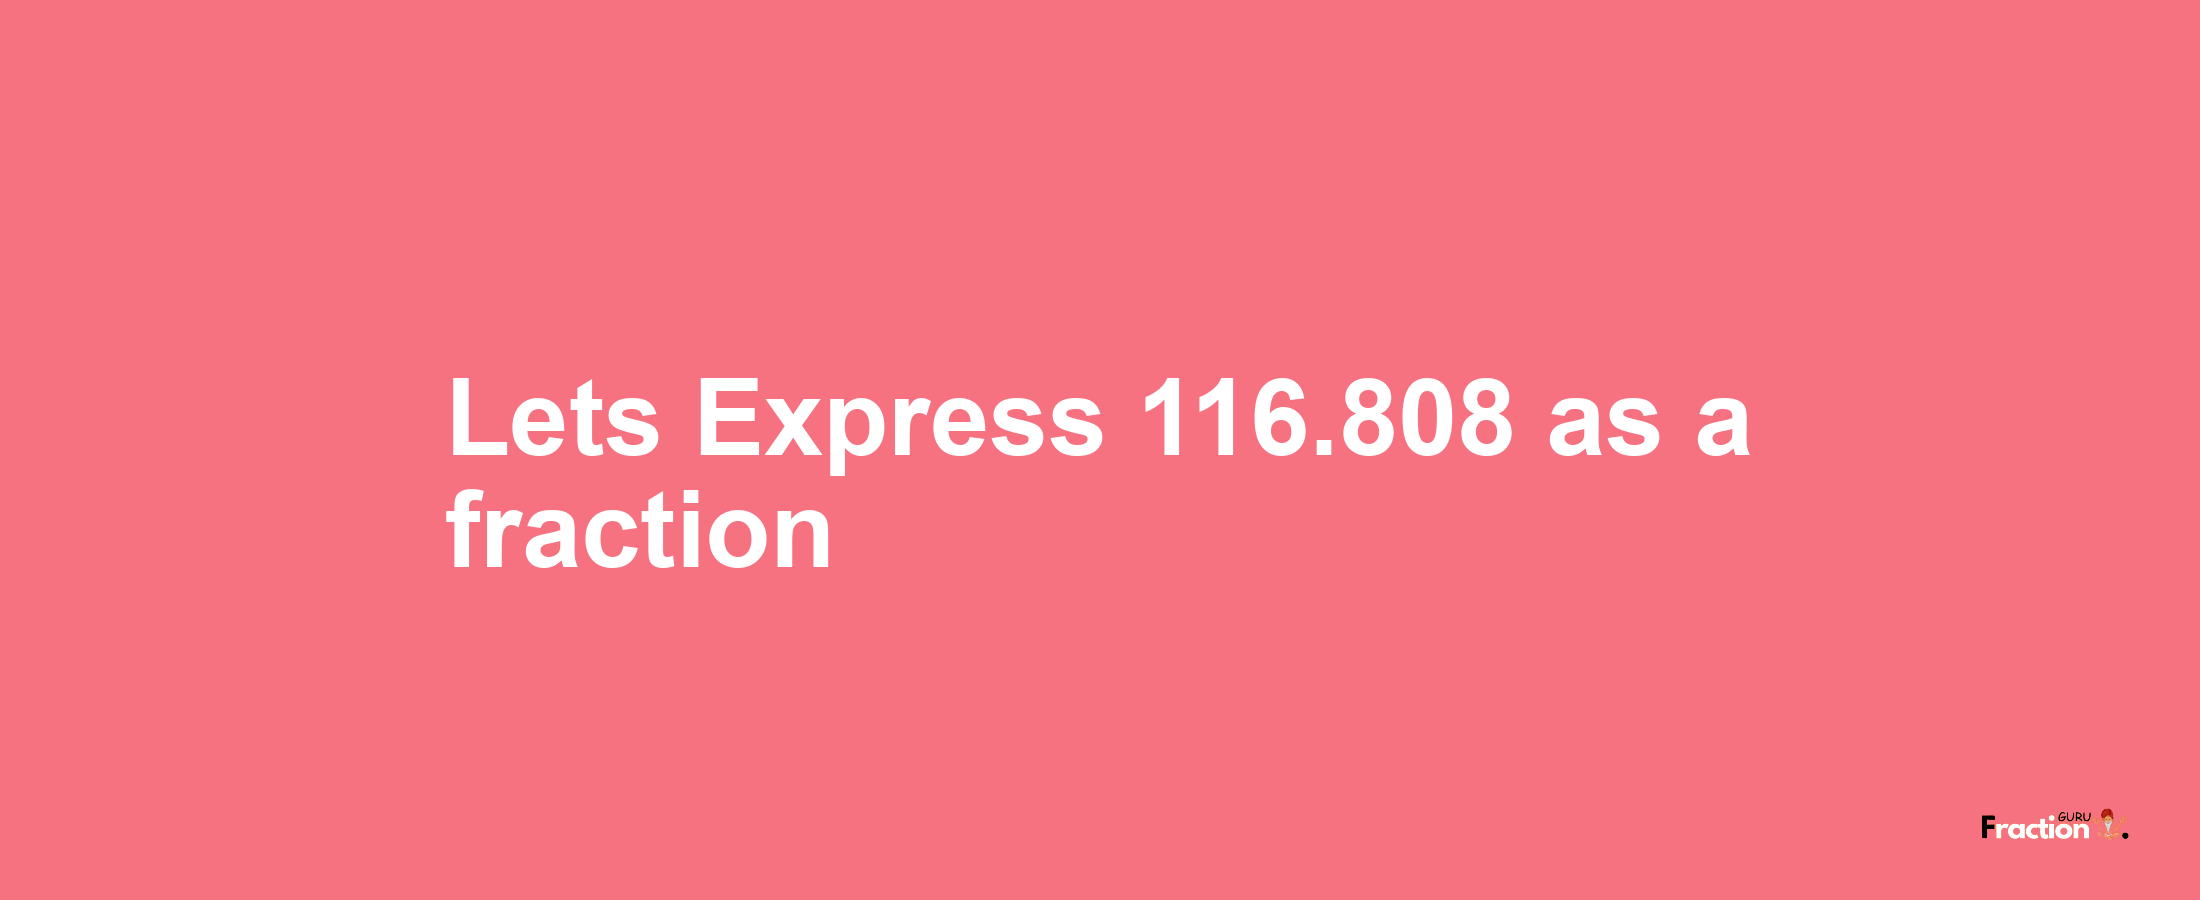 Lets Express 116.808 as afraction